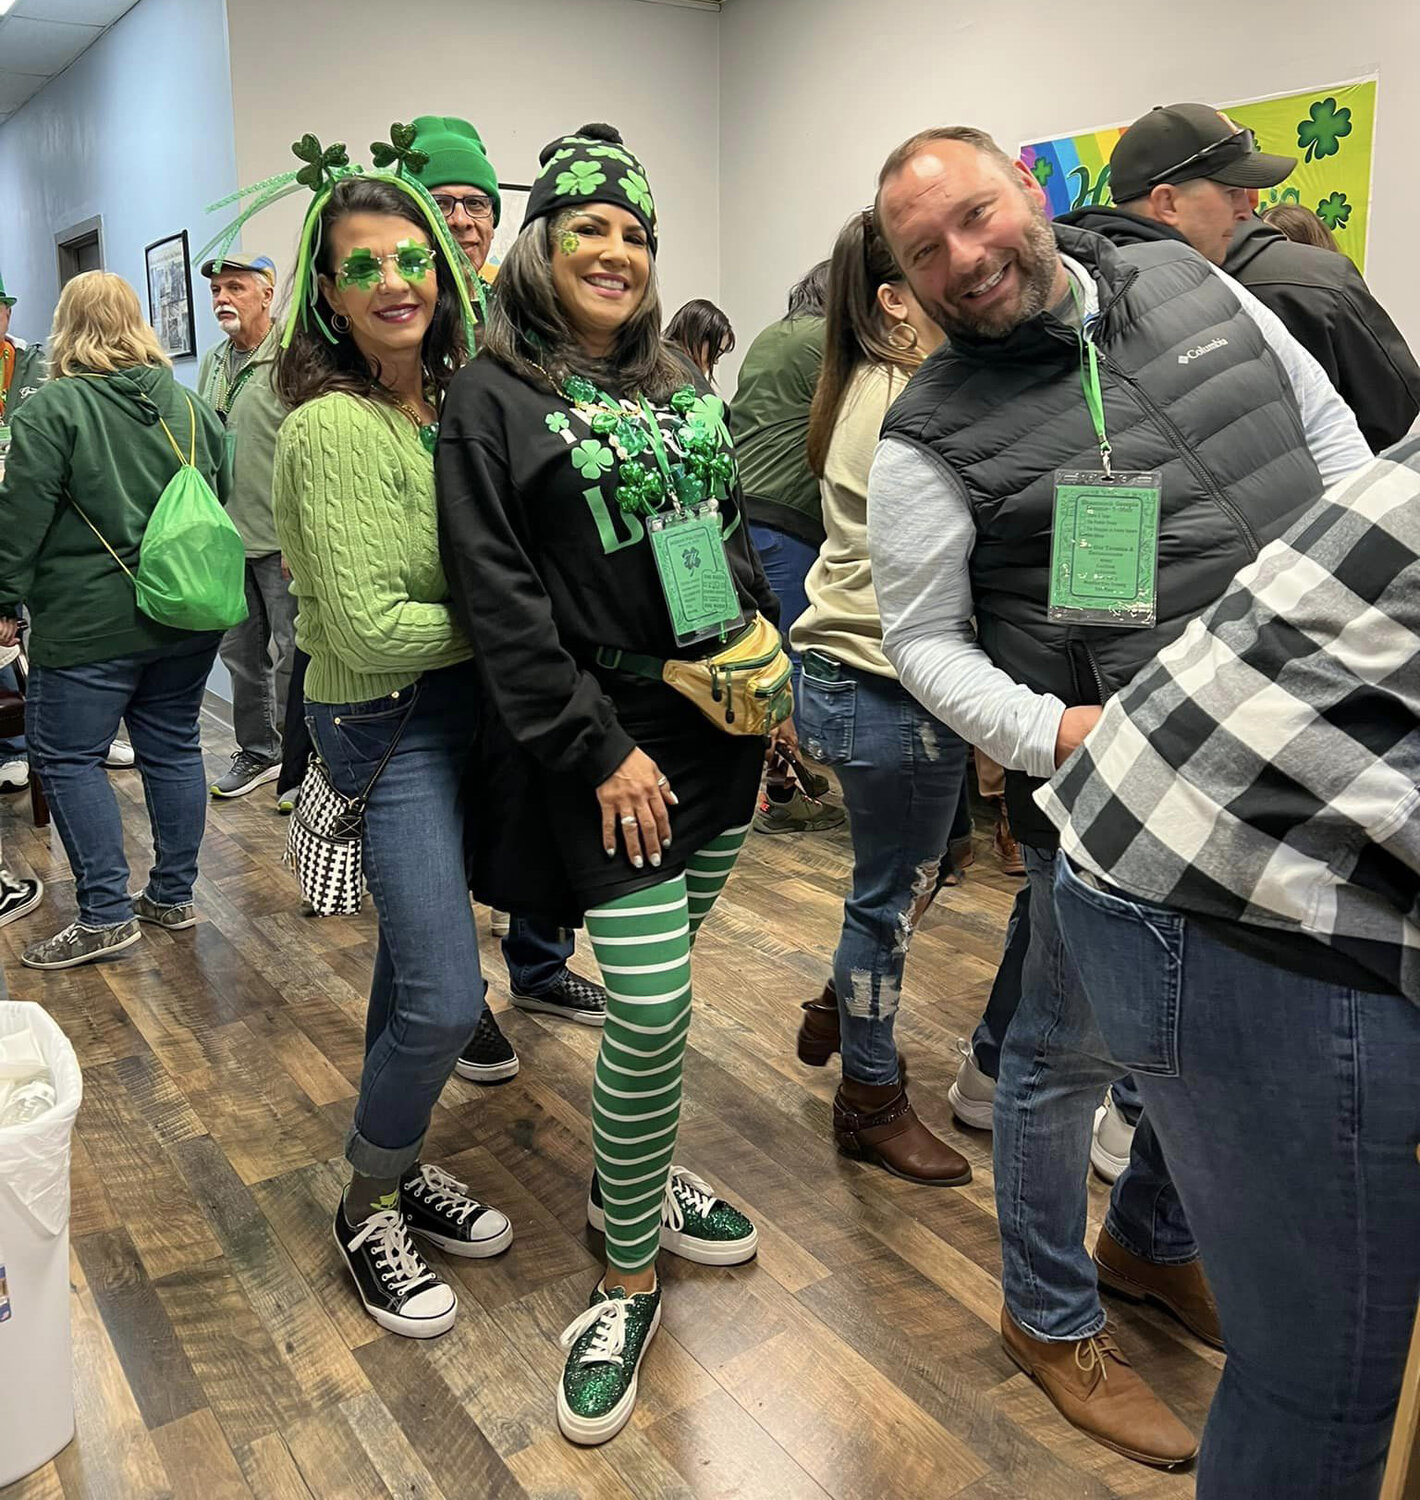 Toasting the Town: St. Patrick’s Day Pub Crawl is scheduled for March 16 in downtown Milford.